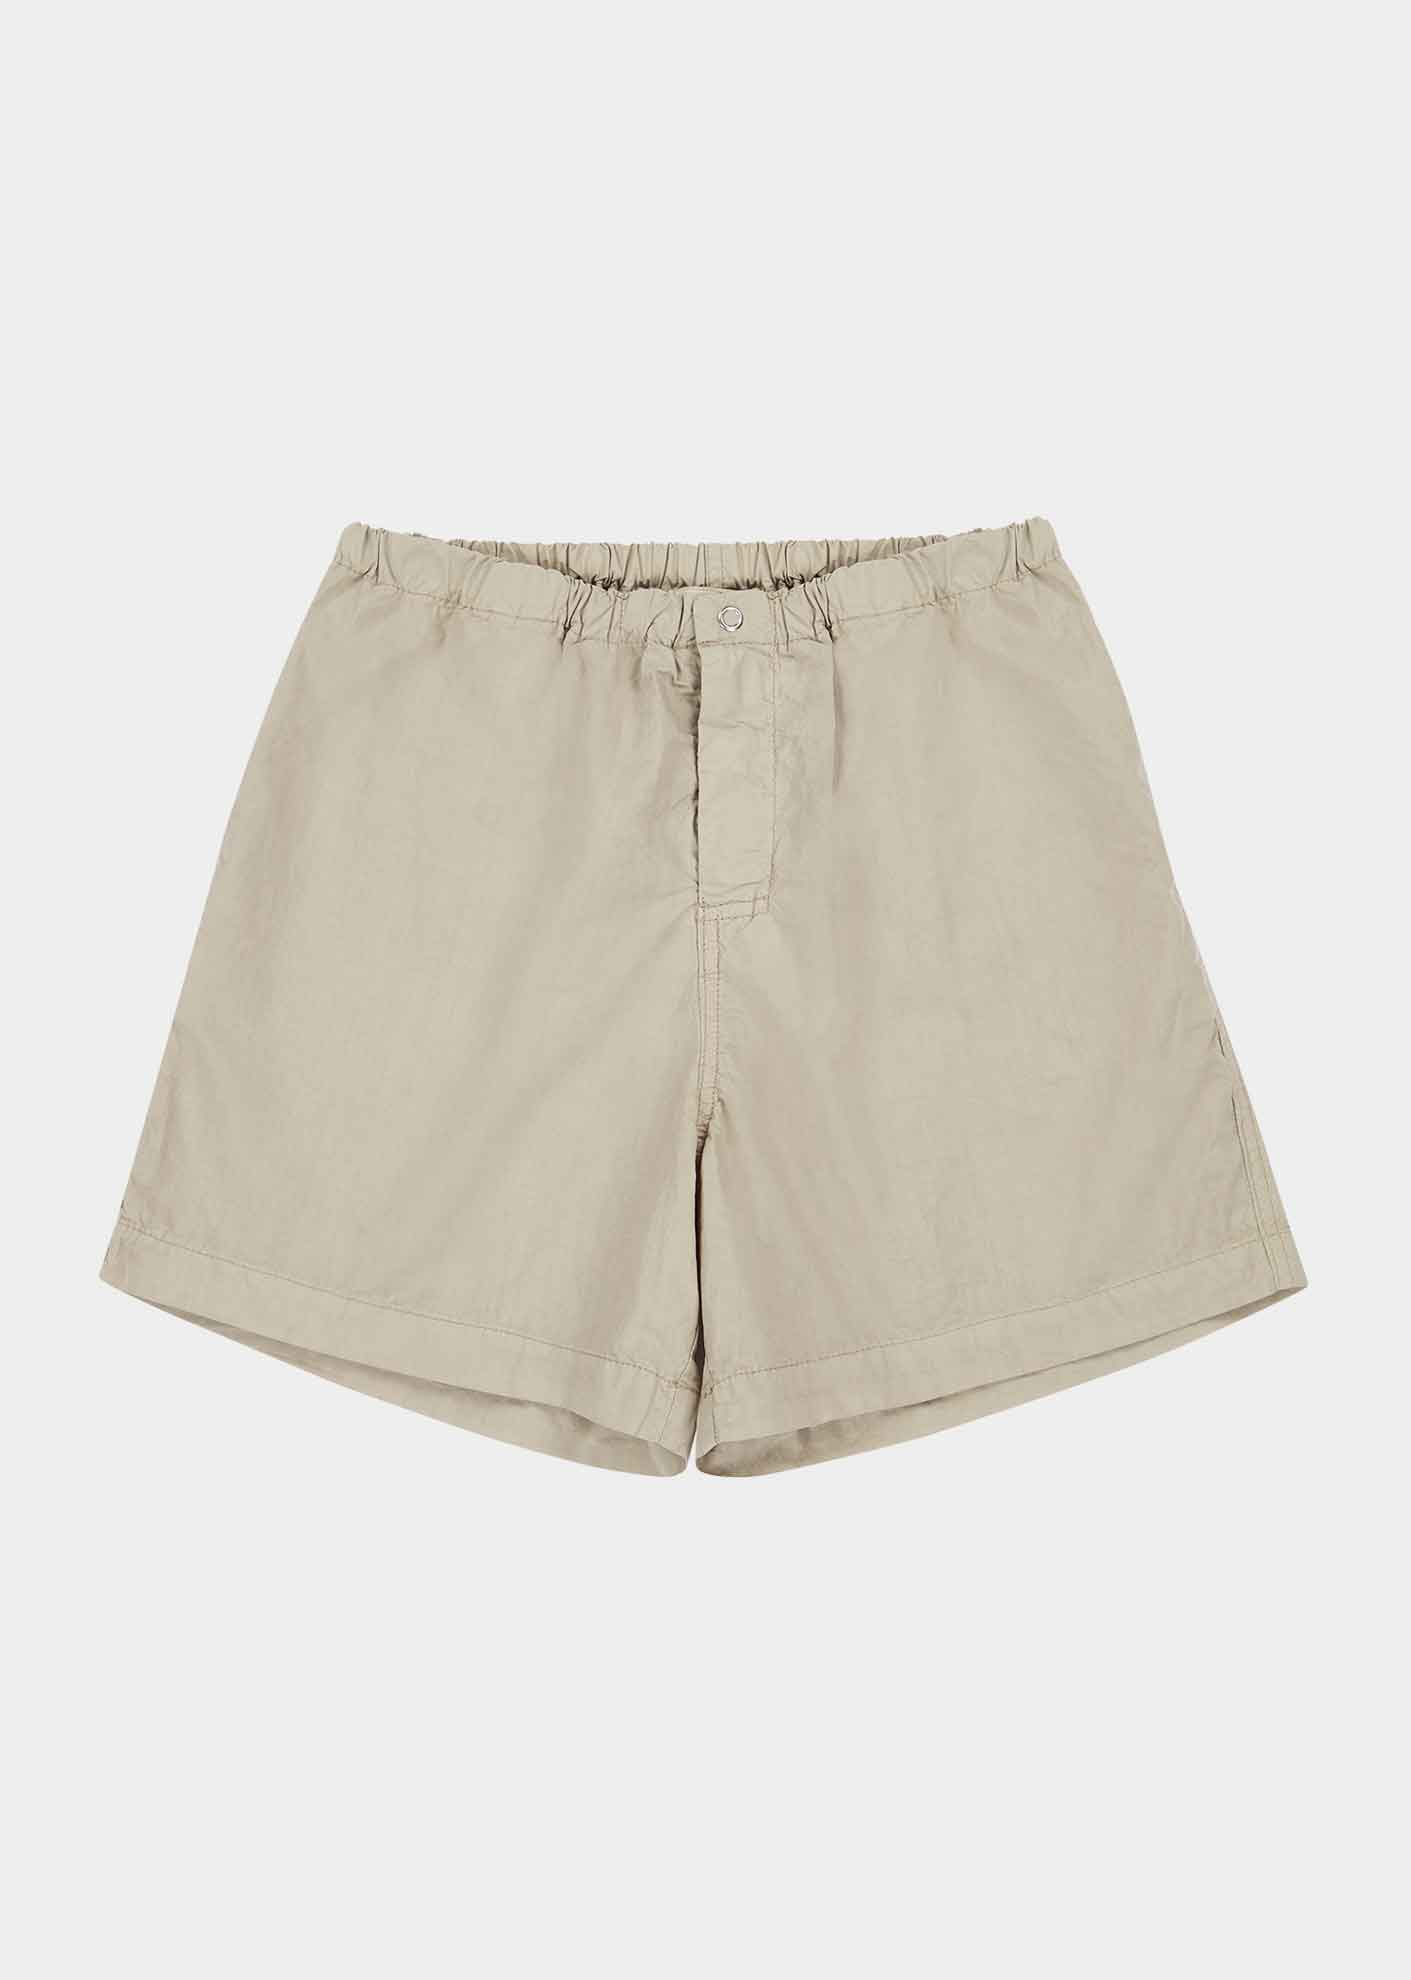 Teens Shorts: Buy Shorts for Teens Online